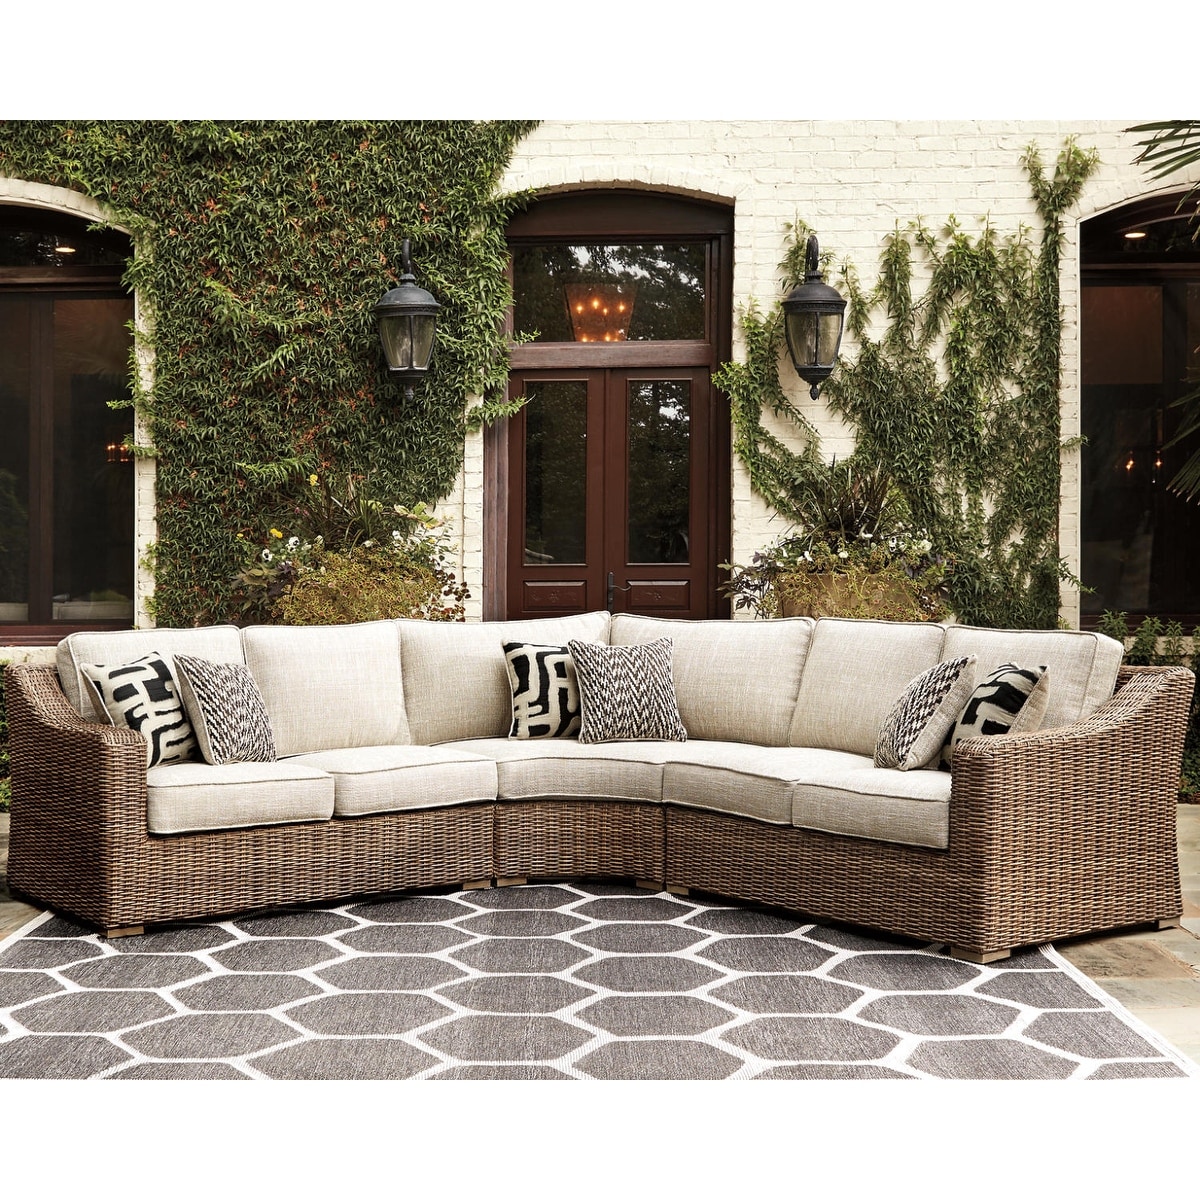 Signature Design by - & Beige Beachcroft 26396066 Bath Bed Outdoor Sectional Beyond Sale On Ashley - 